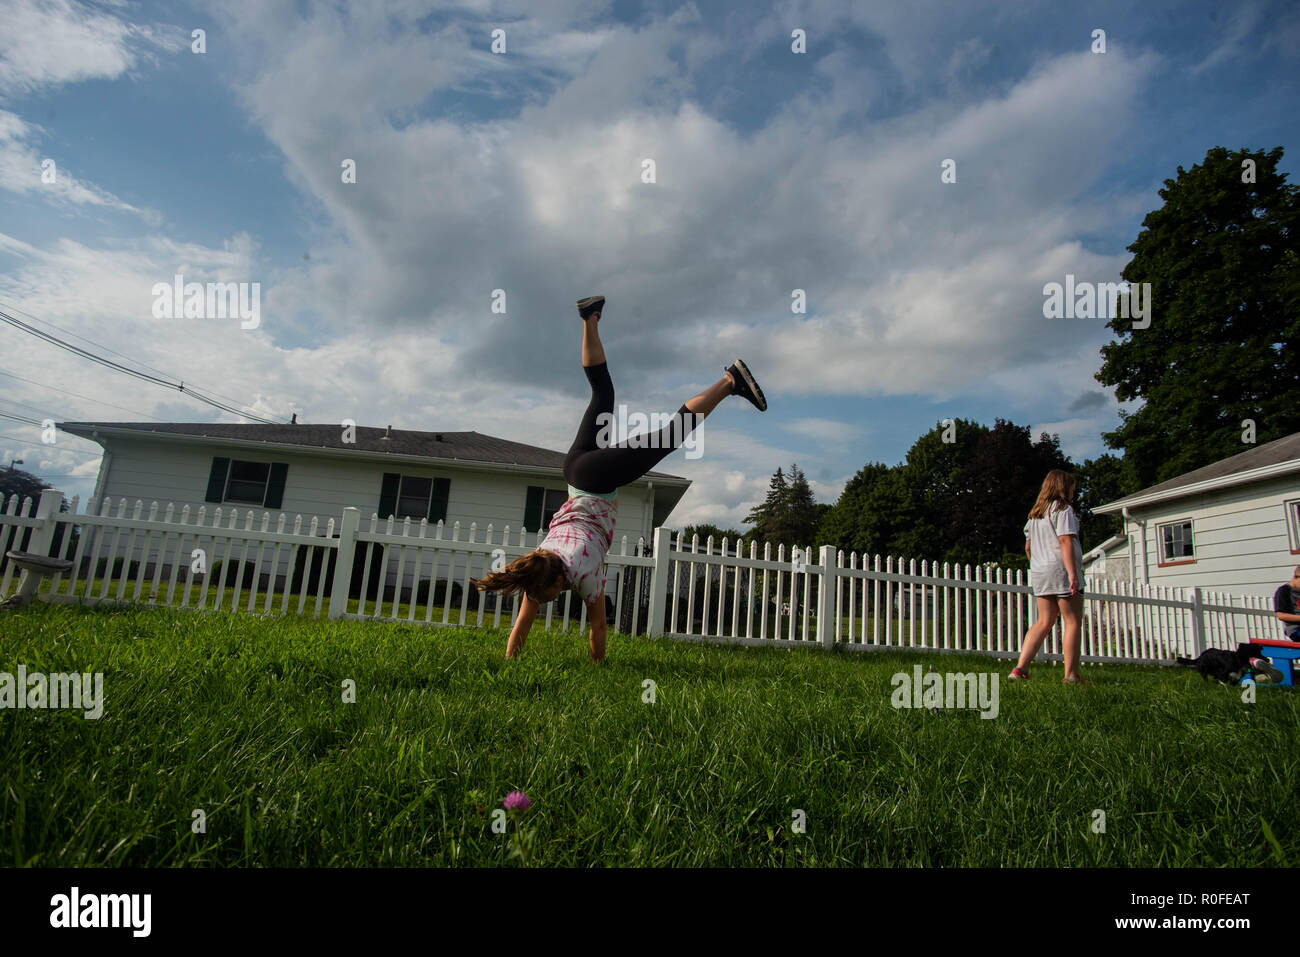 A young girls does a cartwheel in her family's backyard in the United States. Stock Photo